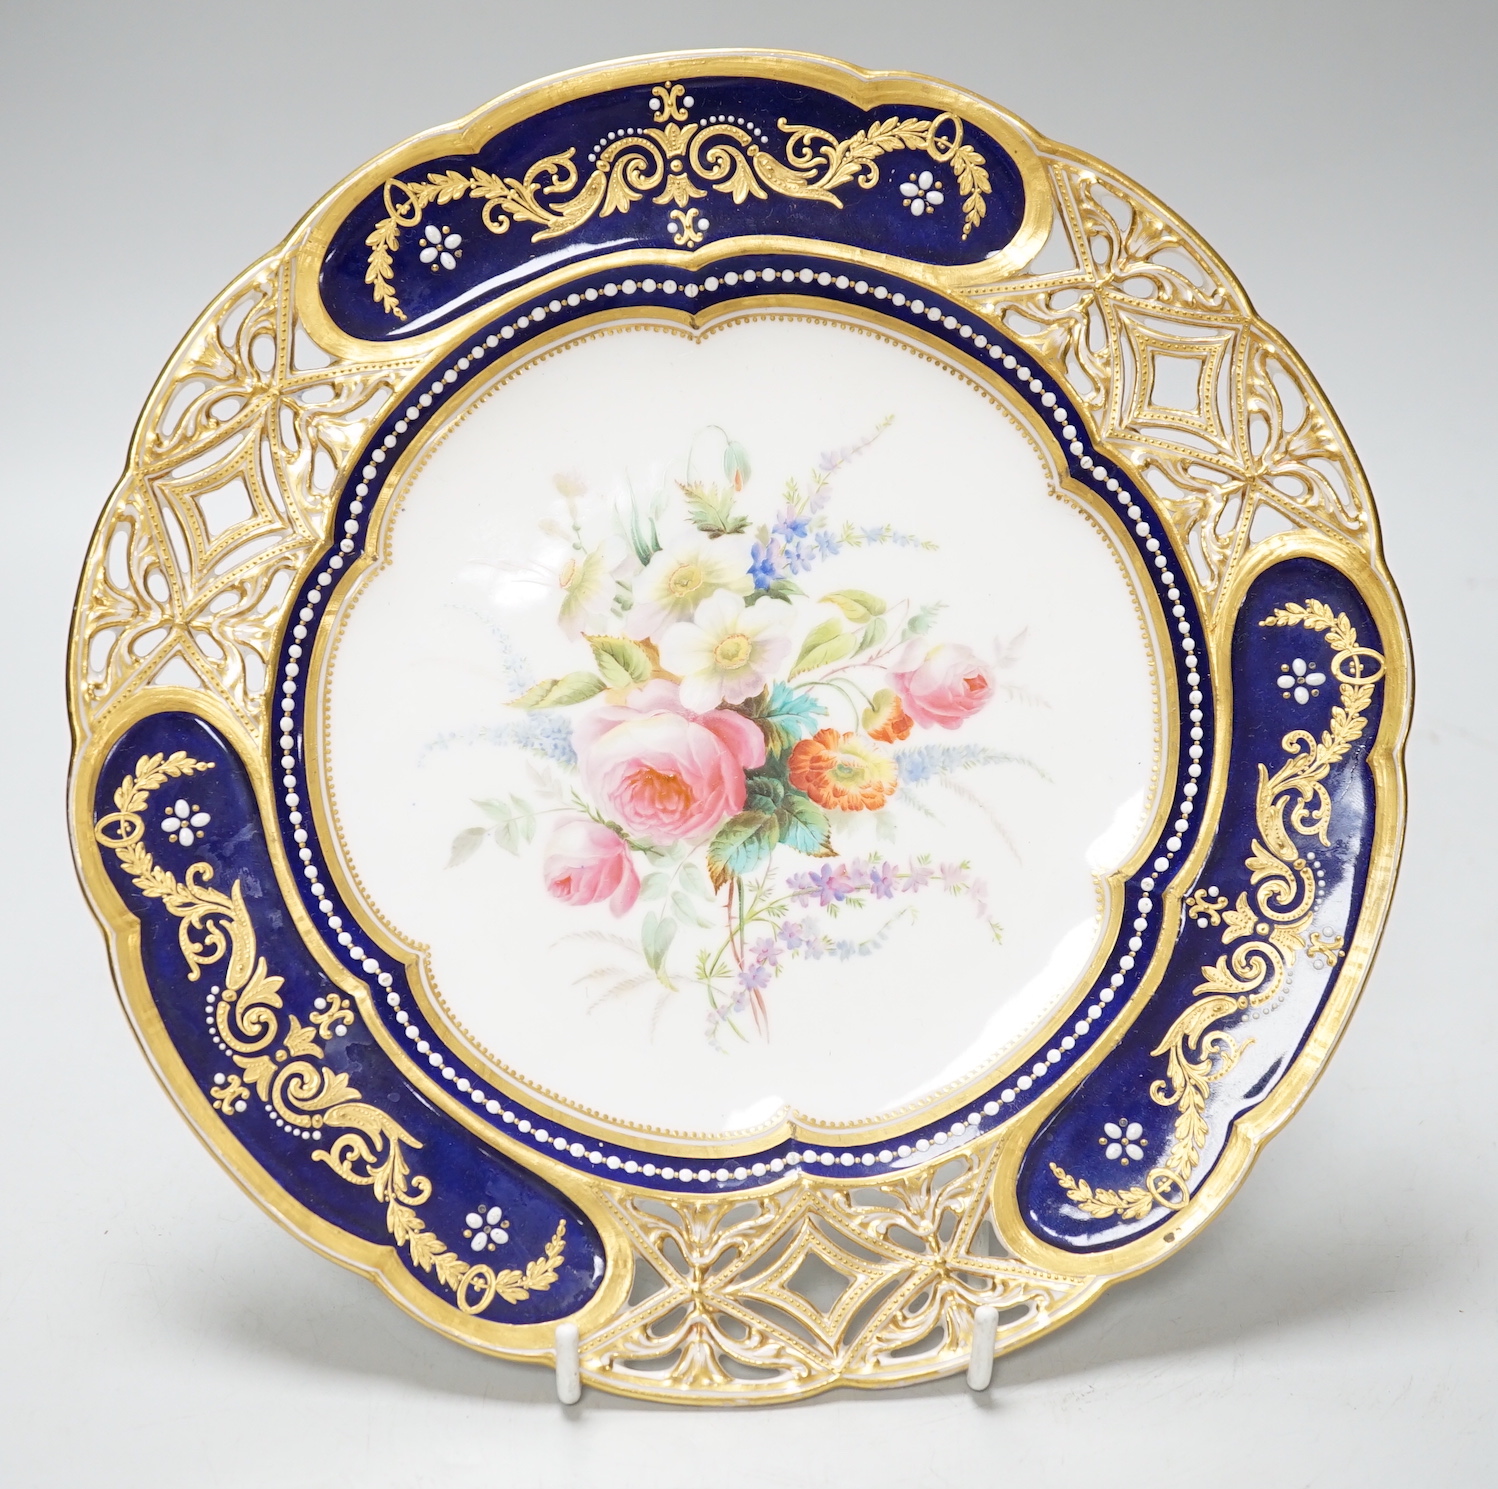 A Coalport plate with pierced border enamelled with white flowers and neo-classical raised paste